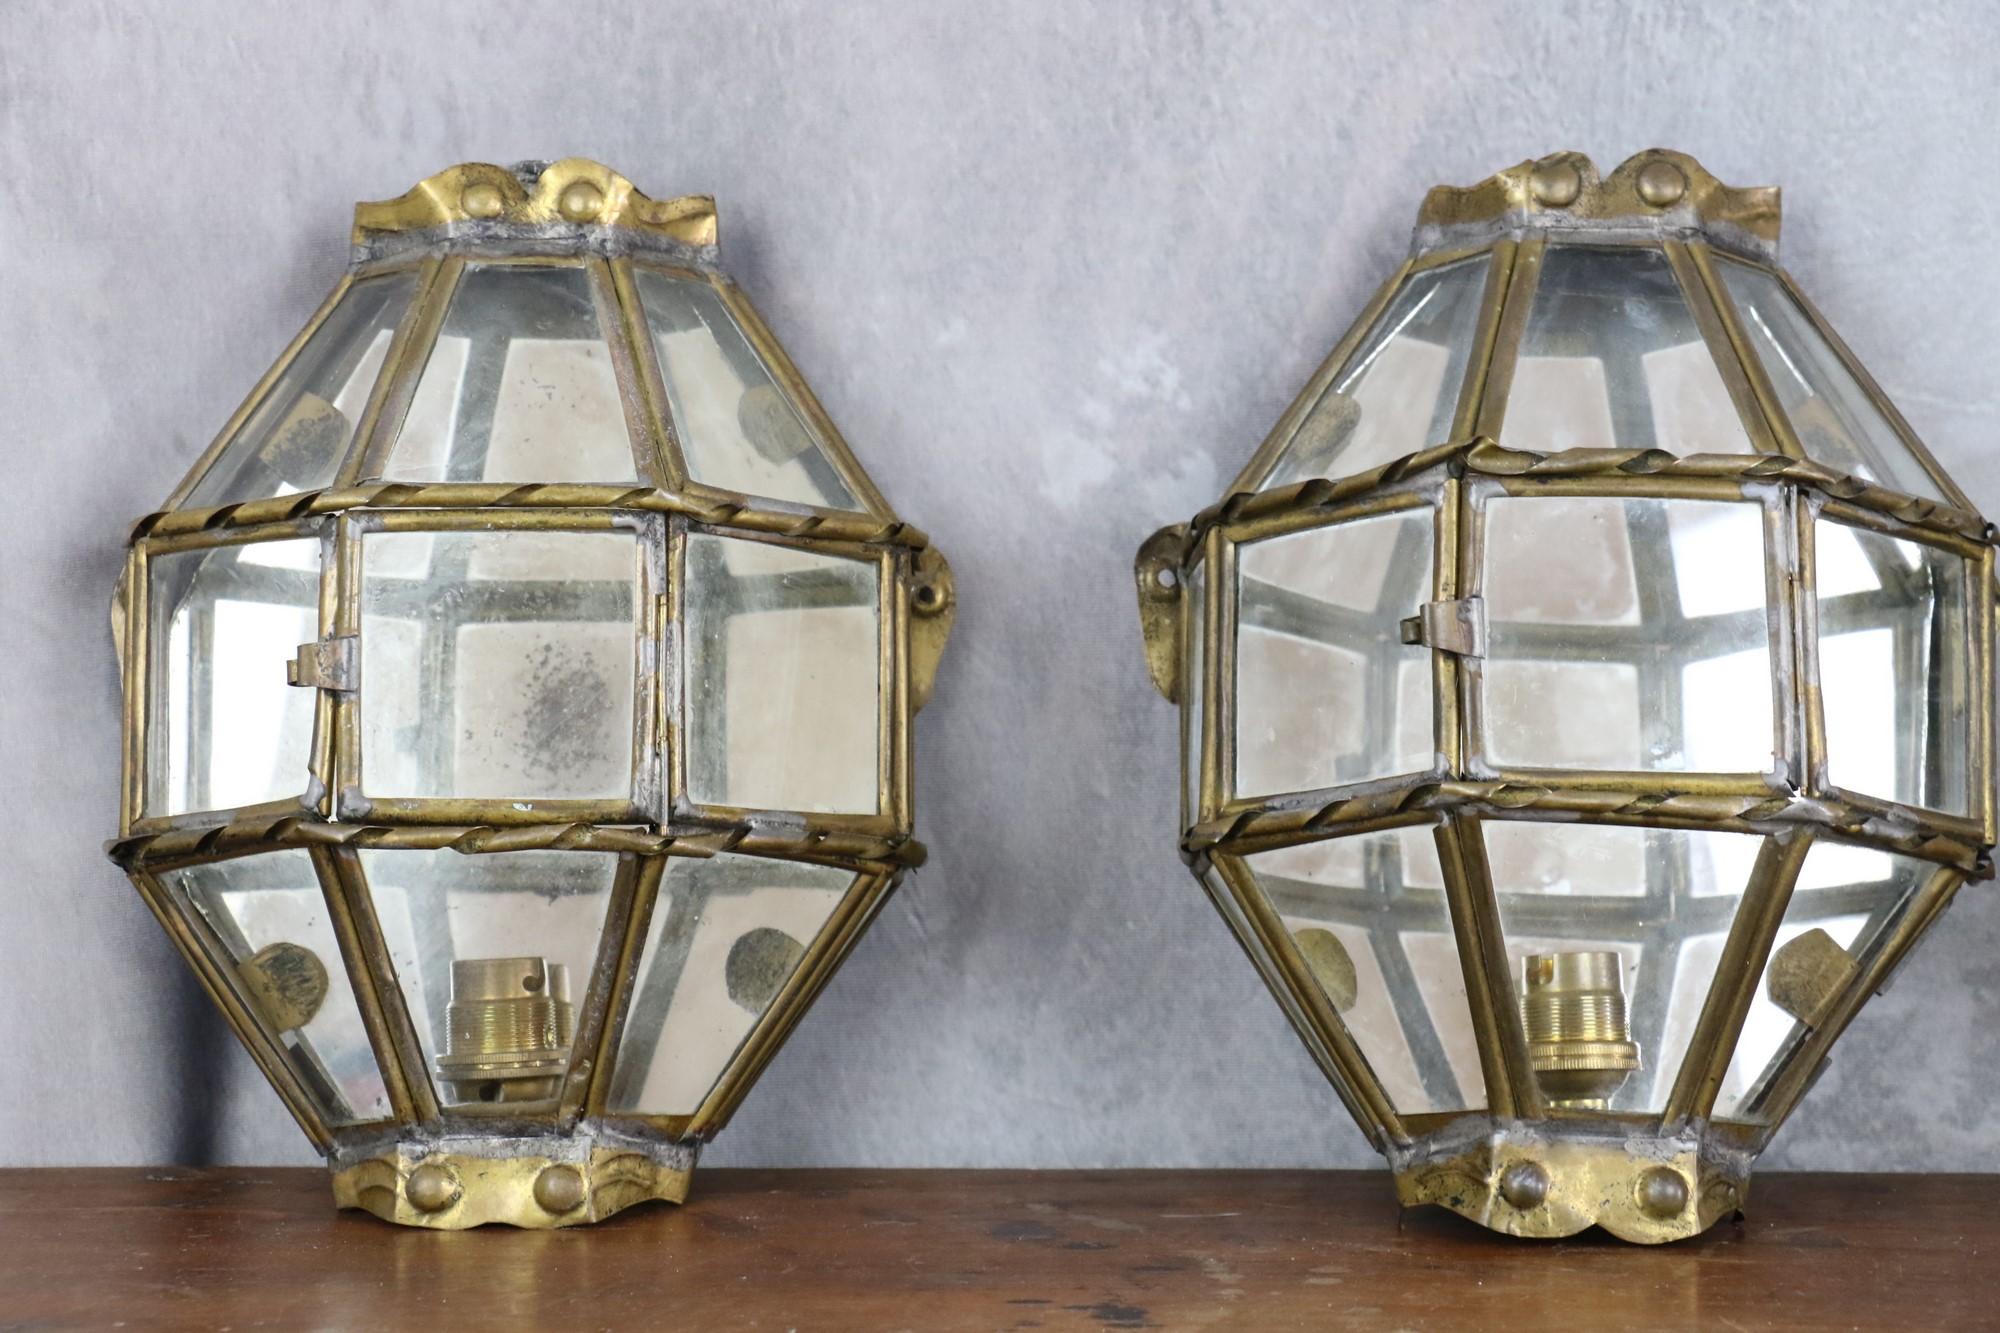 Trio of Brass and Glass Vintage Handcrafted Lantern Wall Lamps, 1940s, France

Beautiful minimal and geometric design highlighted by sophisticated details like the mirror in the back of the reflector and the twisted brass. These beautiful sconces